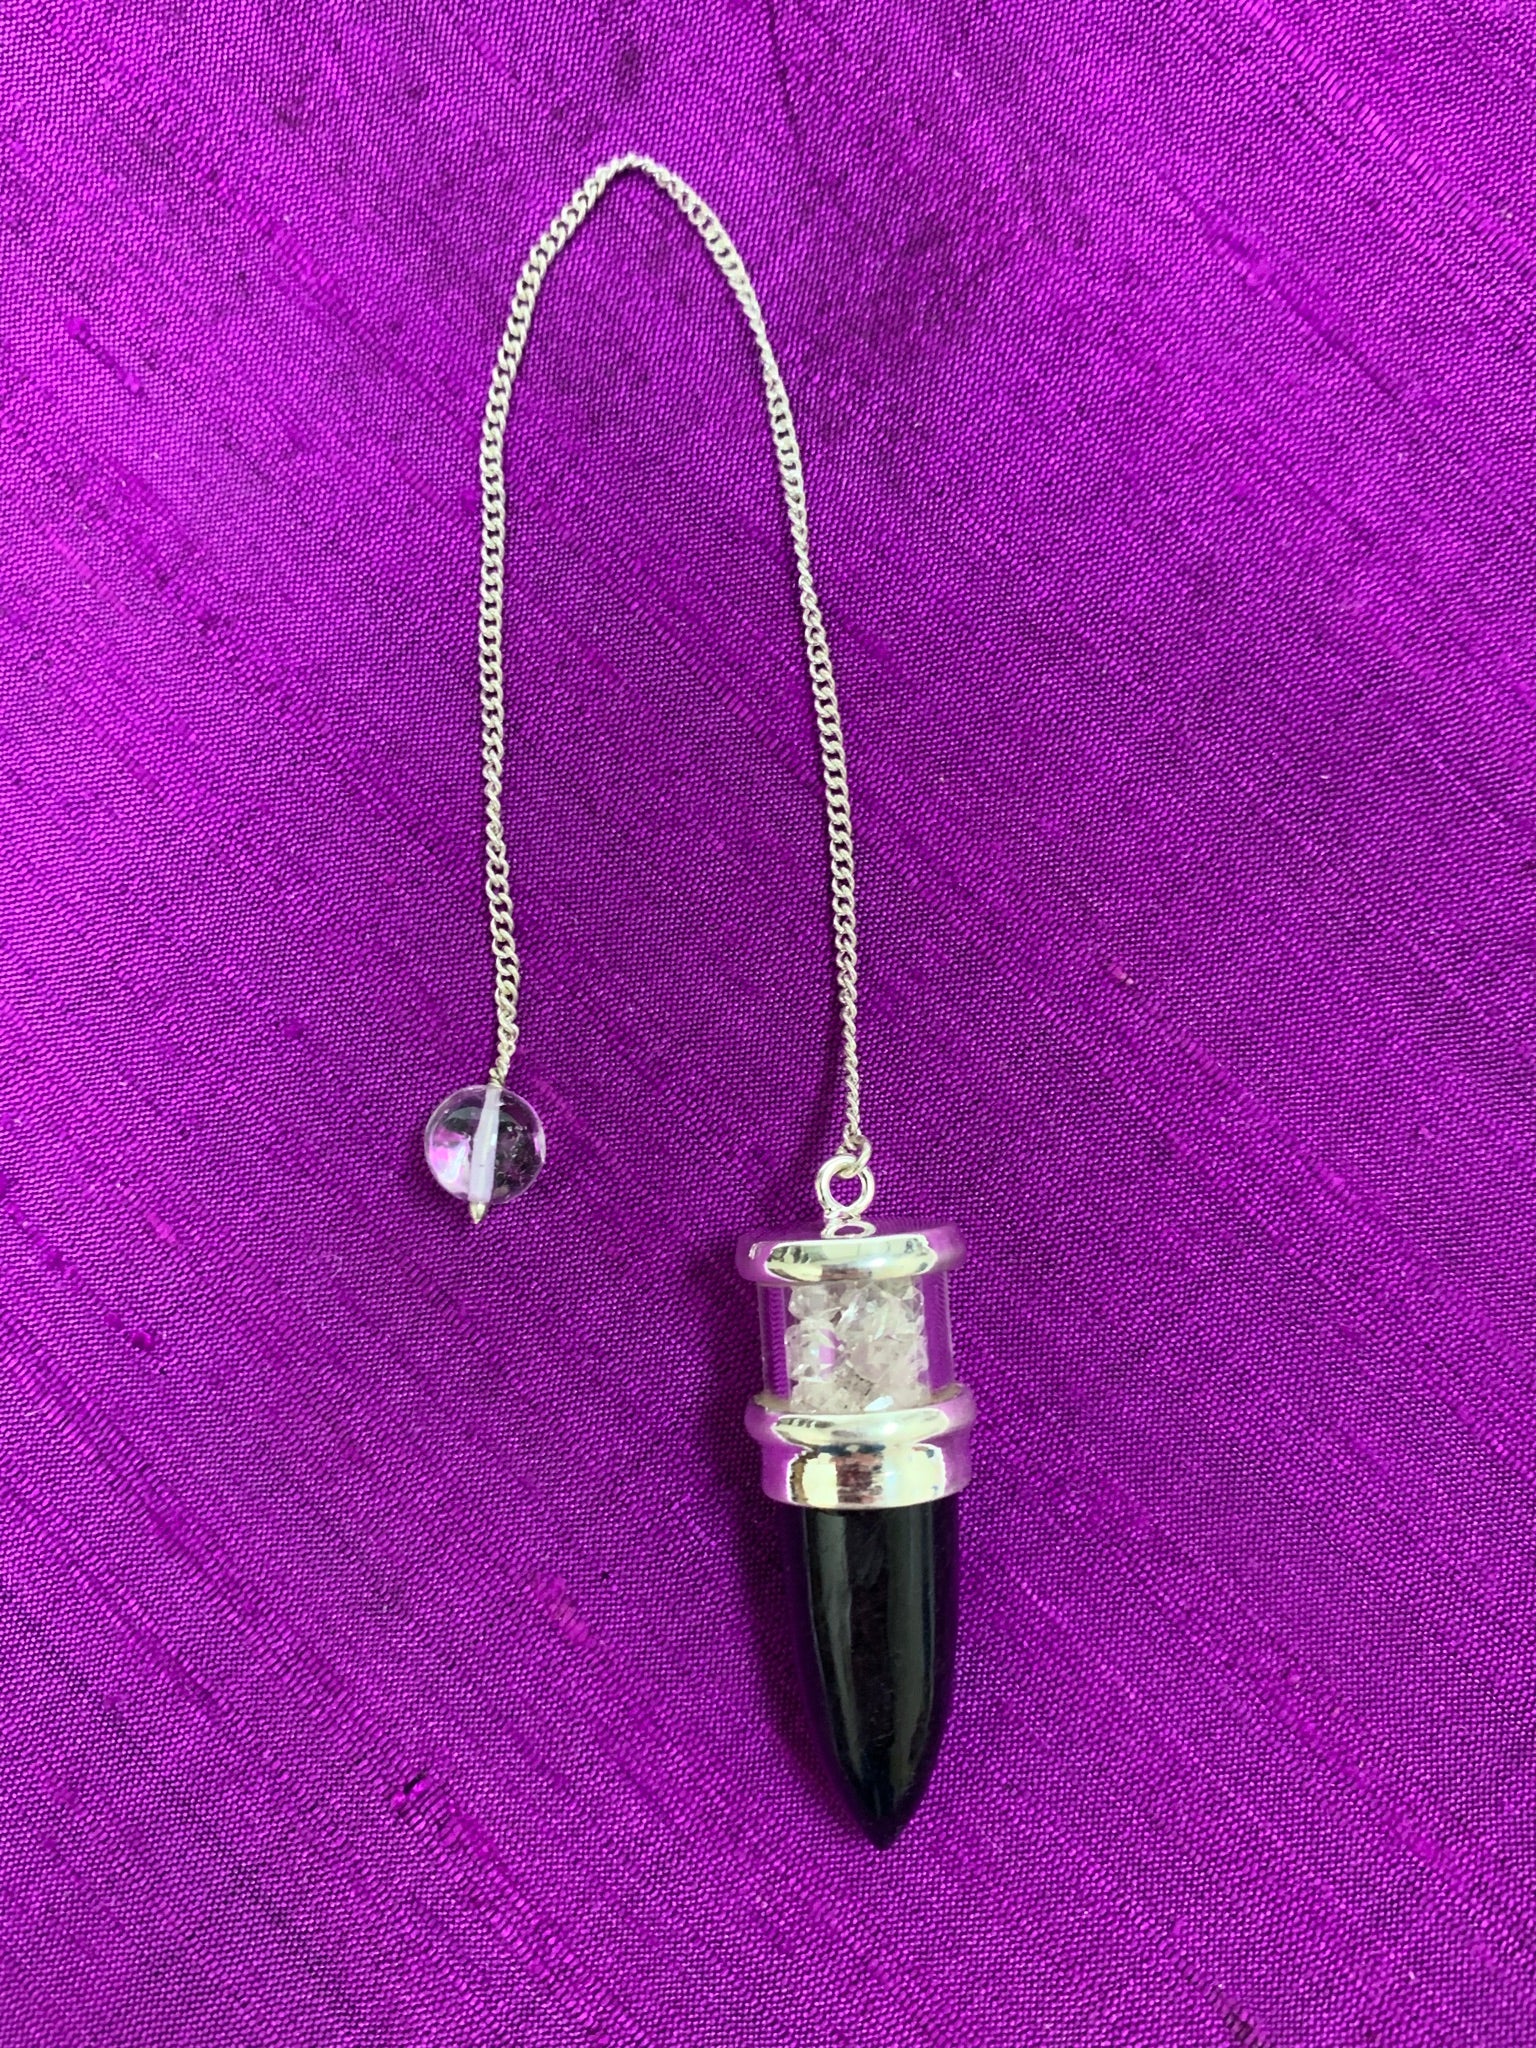 Elegant pendulum with black tourmaline gemstone set in sterling silver with Herkimer diamond chips above it, encased in glass and a clear quartz bead at the opposite end of the silver chain. Pendulums are used as divination tools for receiving information from your guides, angels and higher Self. Cost is $30.